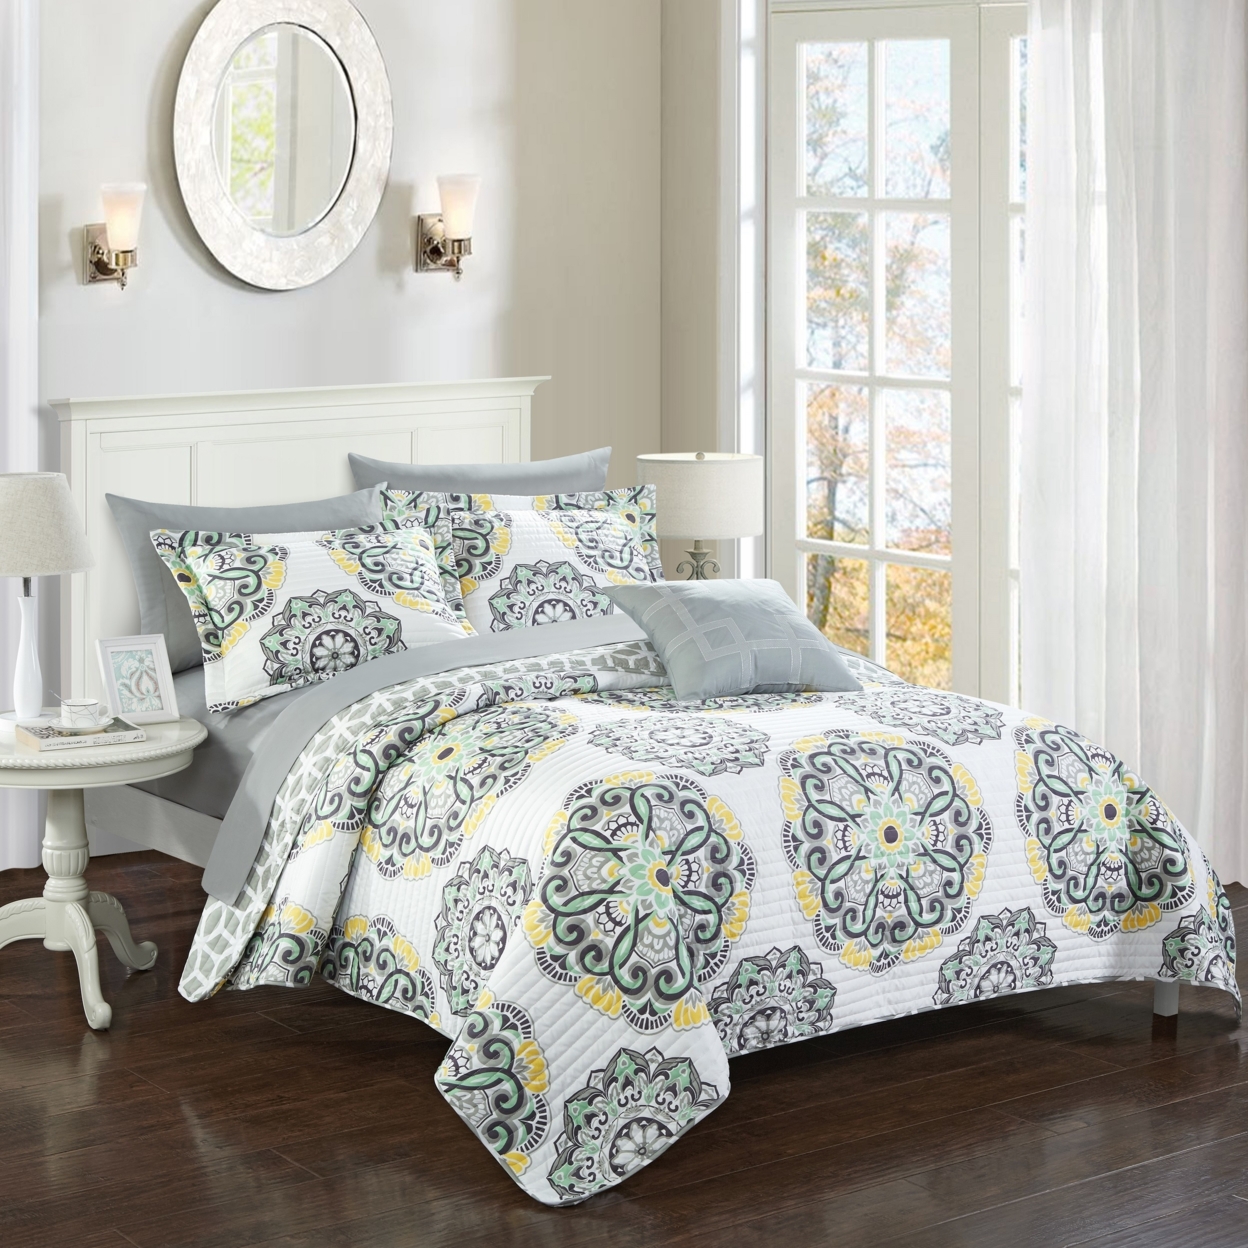 2/3 Piece Majorca Super Soft Microfiber Large Printed Medallion REVERSIBLE With Geometric Printed Backing Duvet Set - Grey, Full/Queen